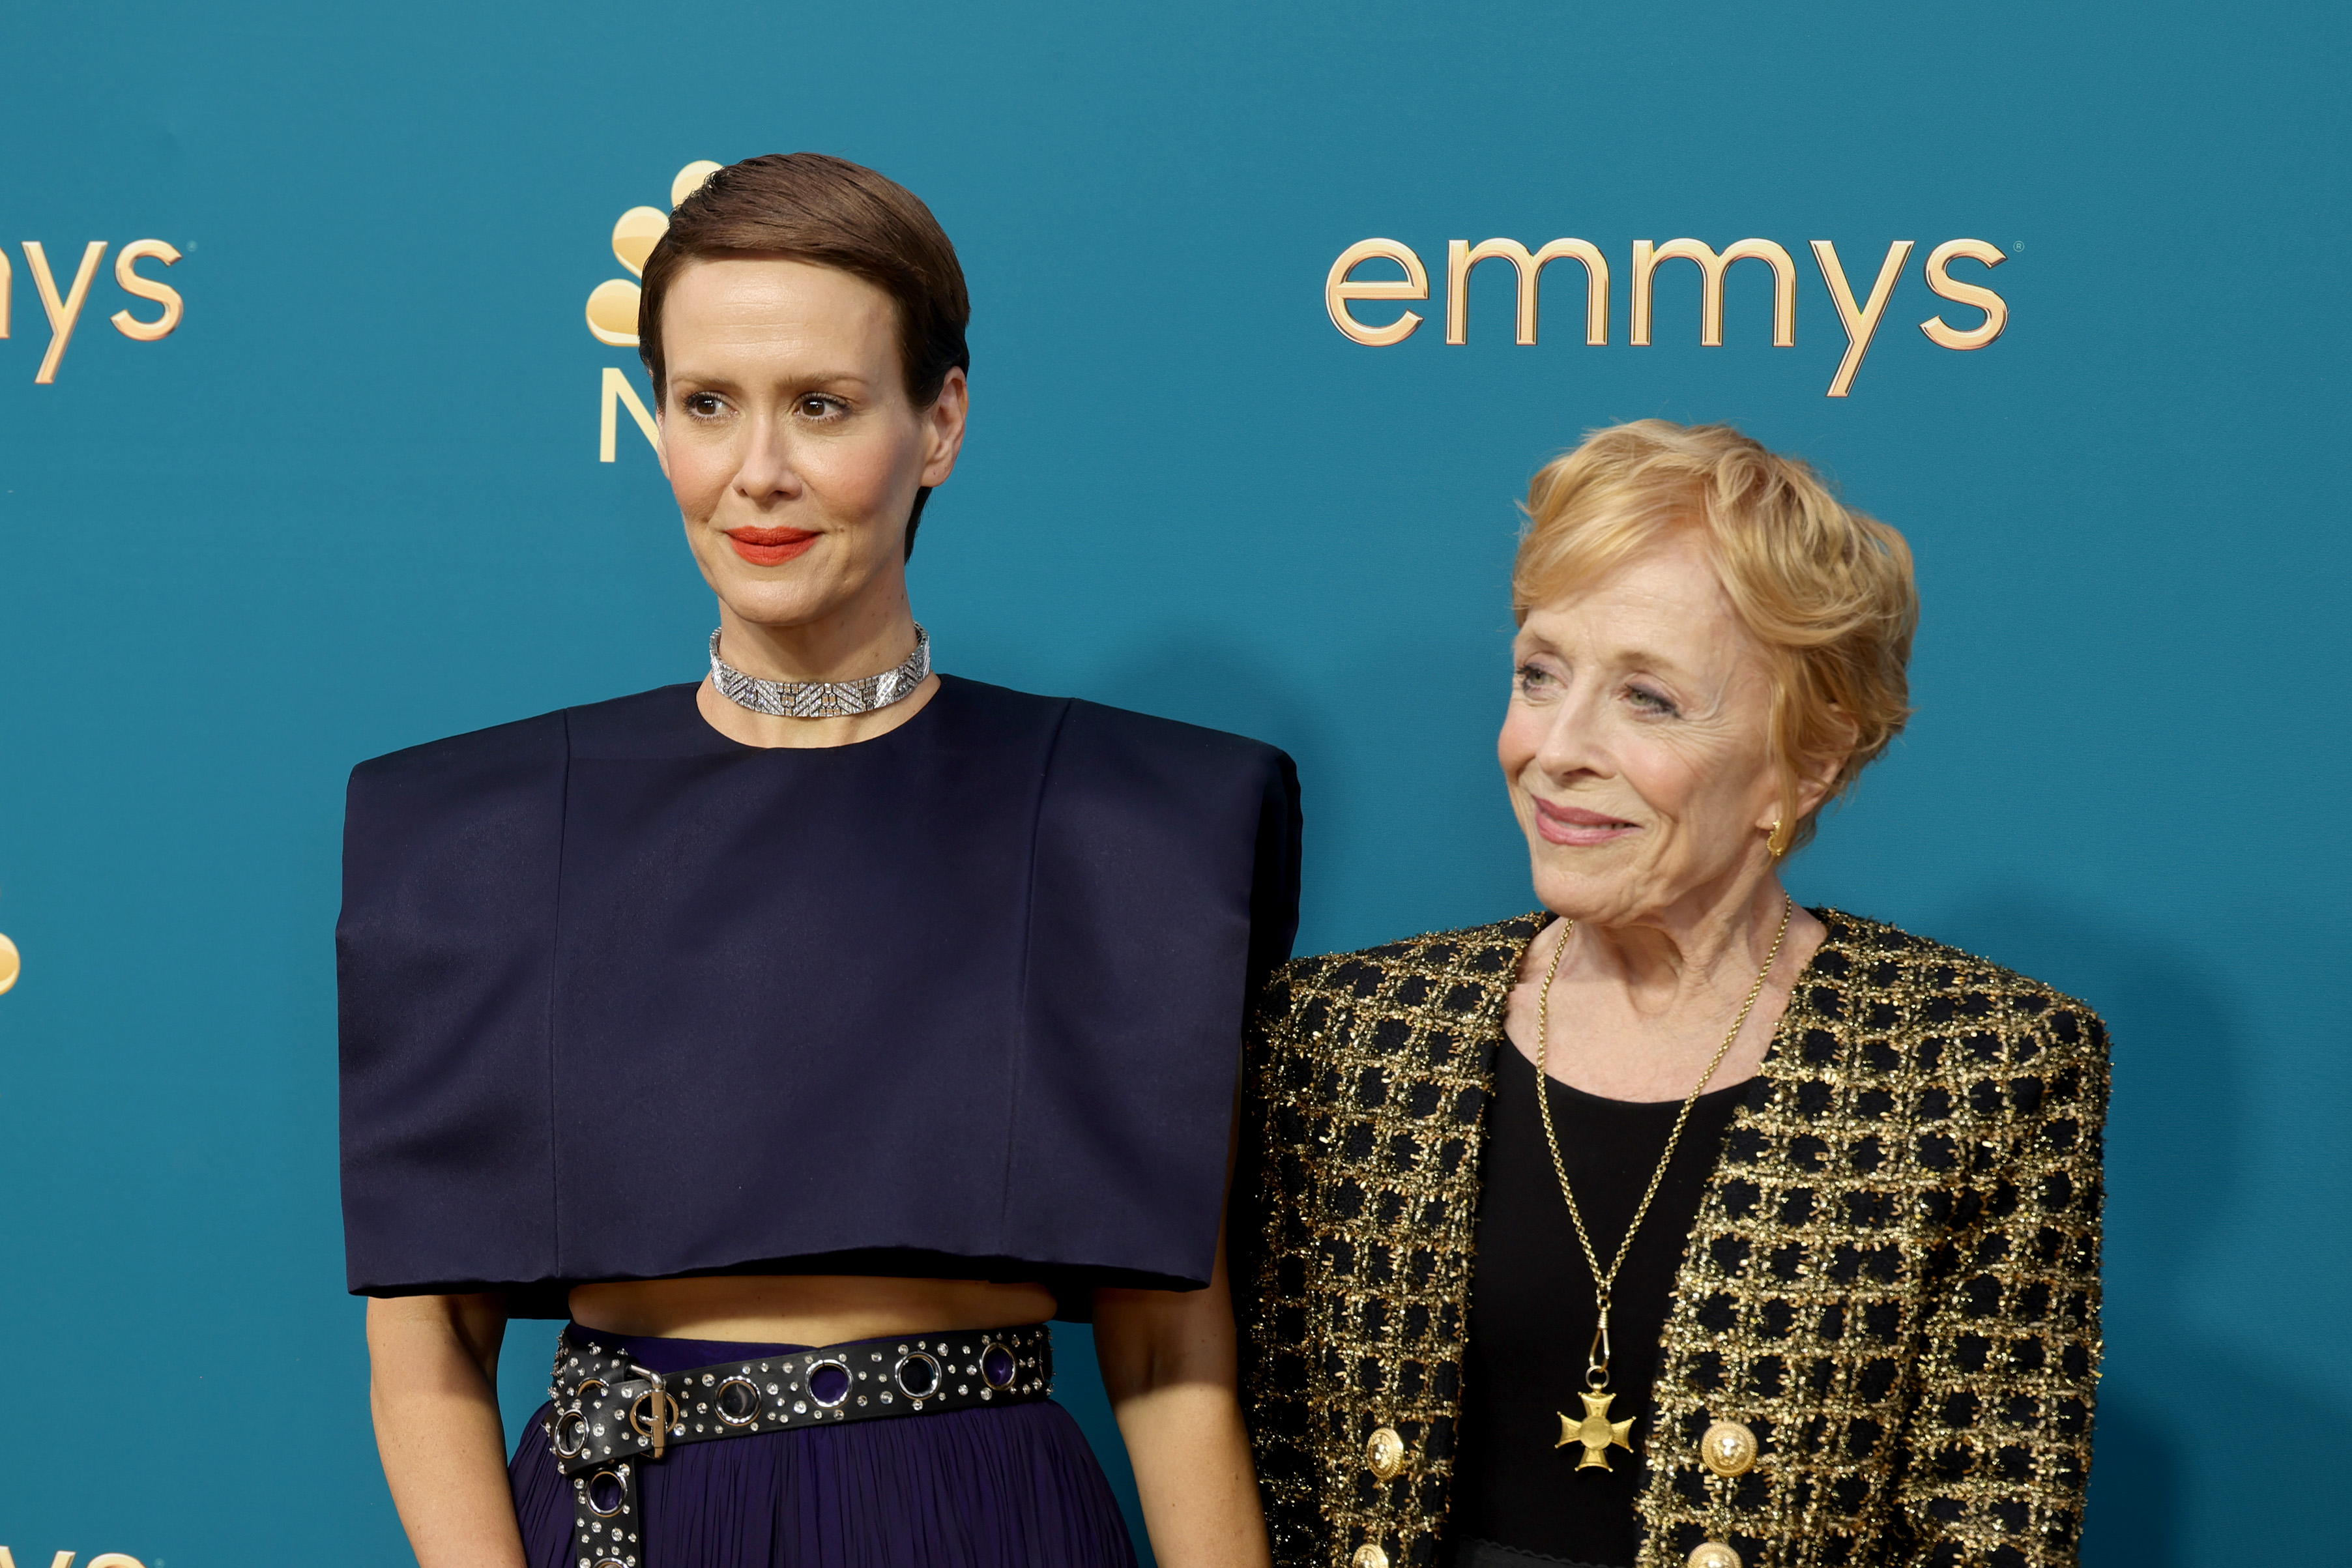 Sarah Paulson and Holland Taylor at the 74th Primetime Emmys on September 12, 2022, in Los Angeles, California. | Source: Getty Images